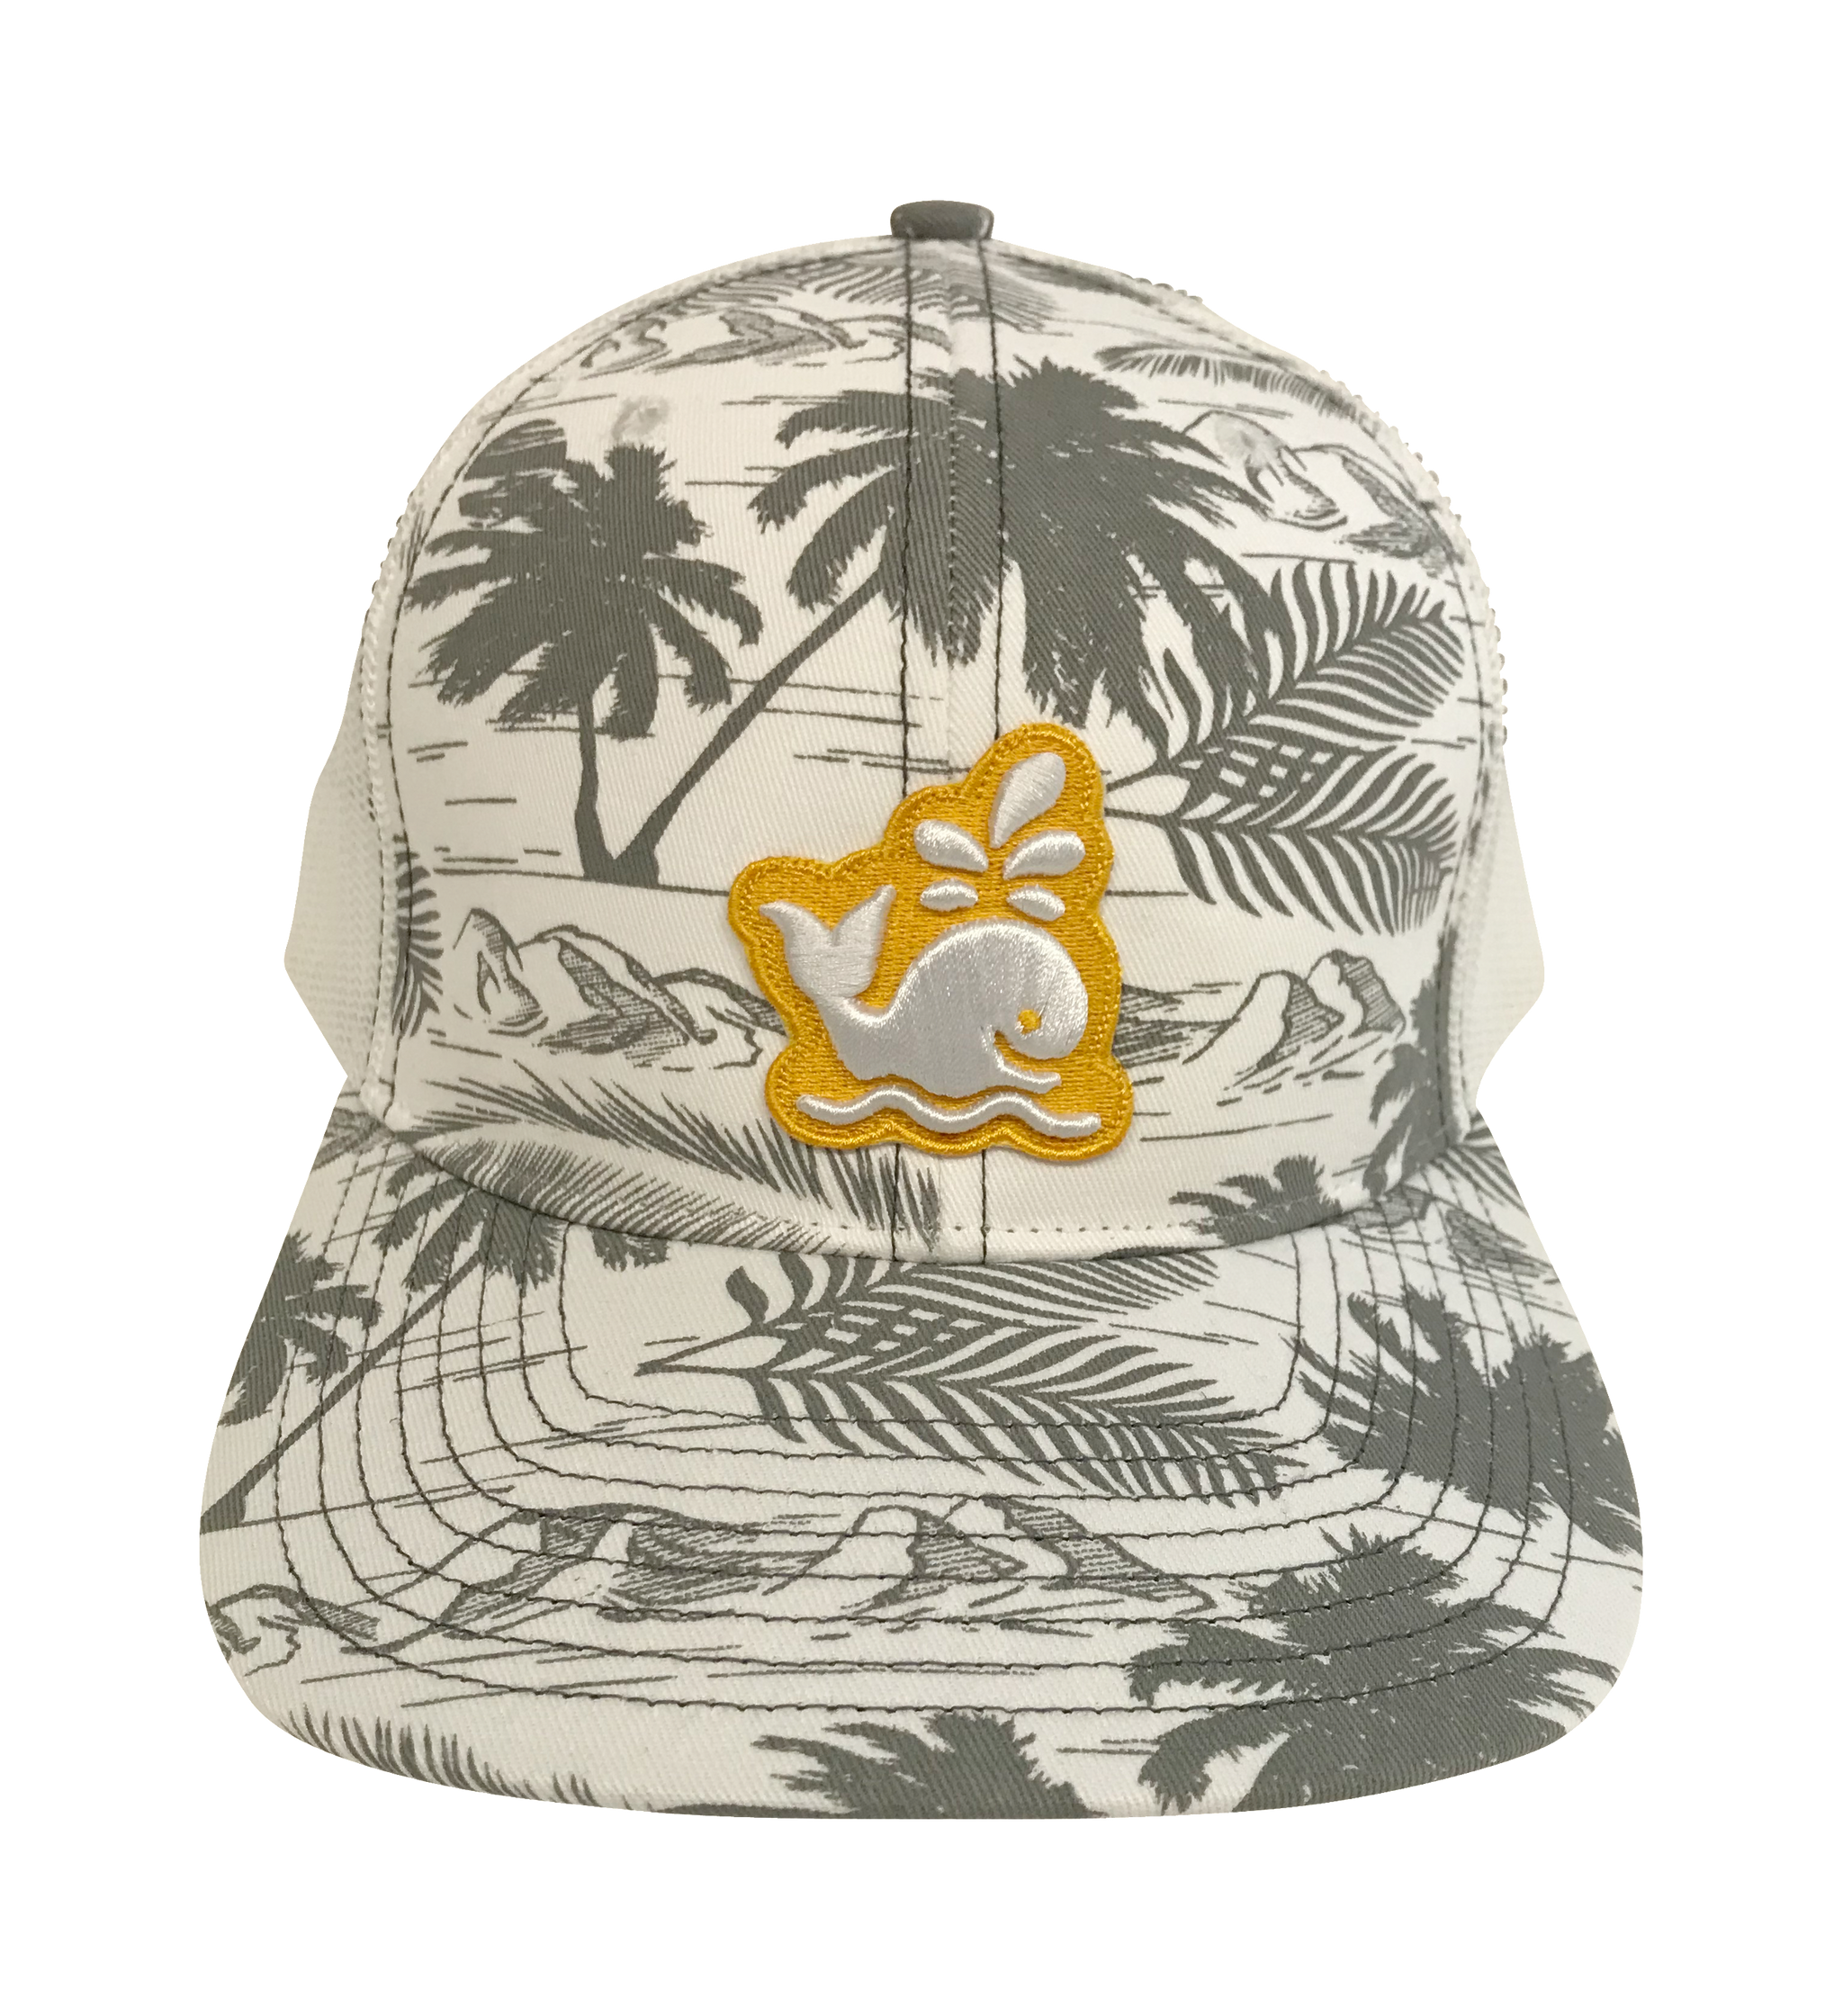 Island Smilin' Spout the Whale Tropical Trucker Hat - Gray